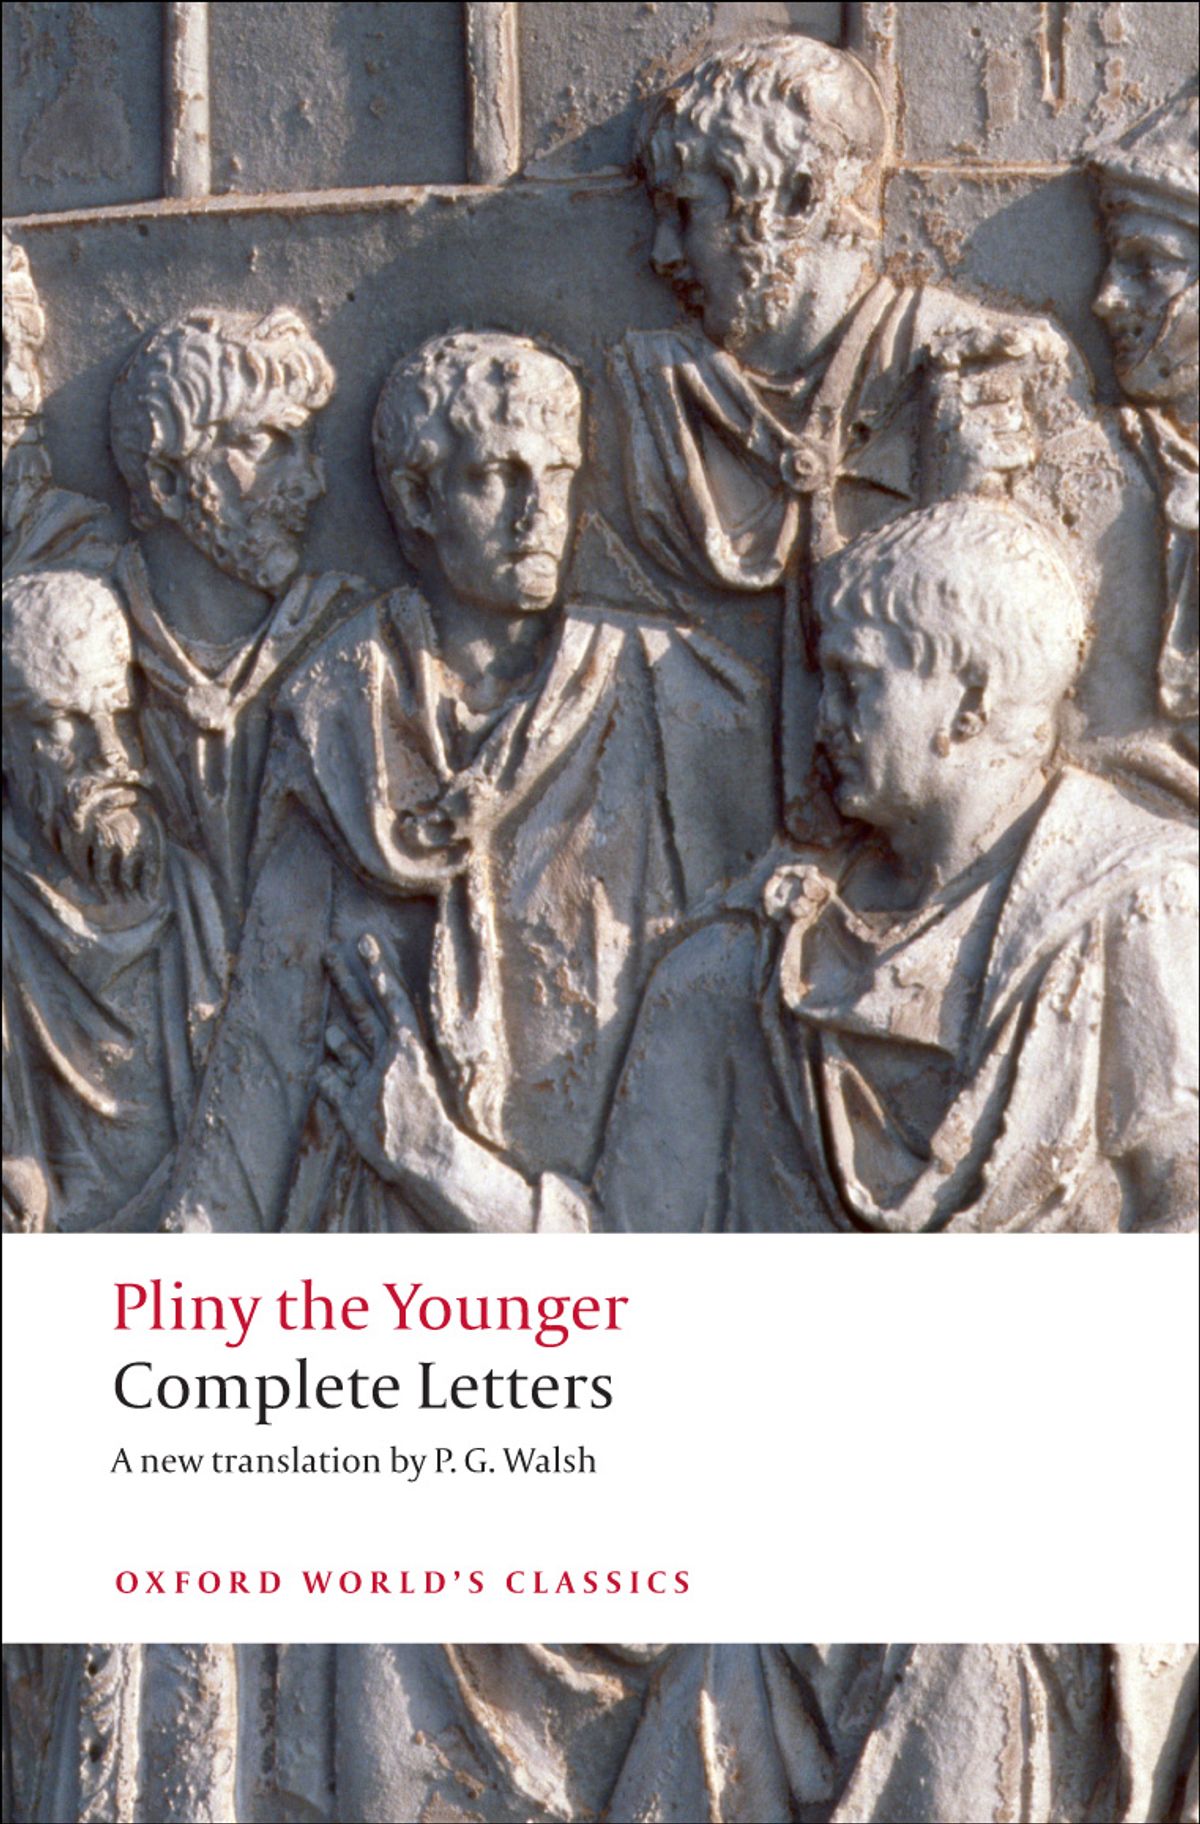 "Pliny the Younger: Complete Letters," by P.G. Walsh (Cains)